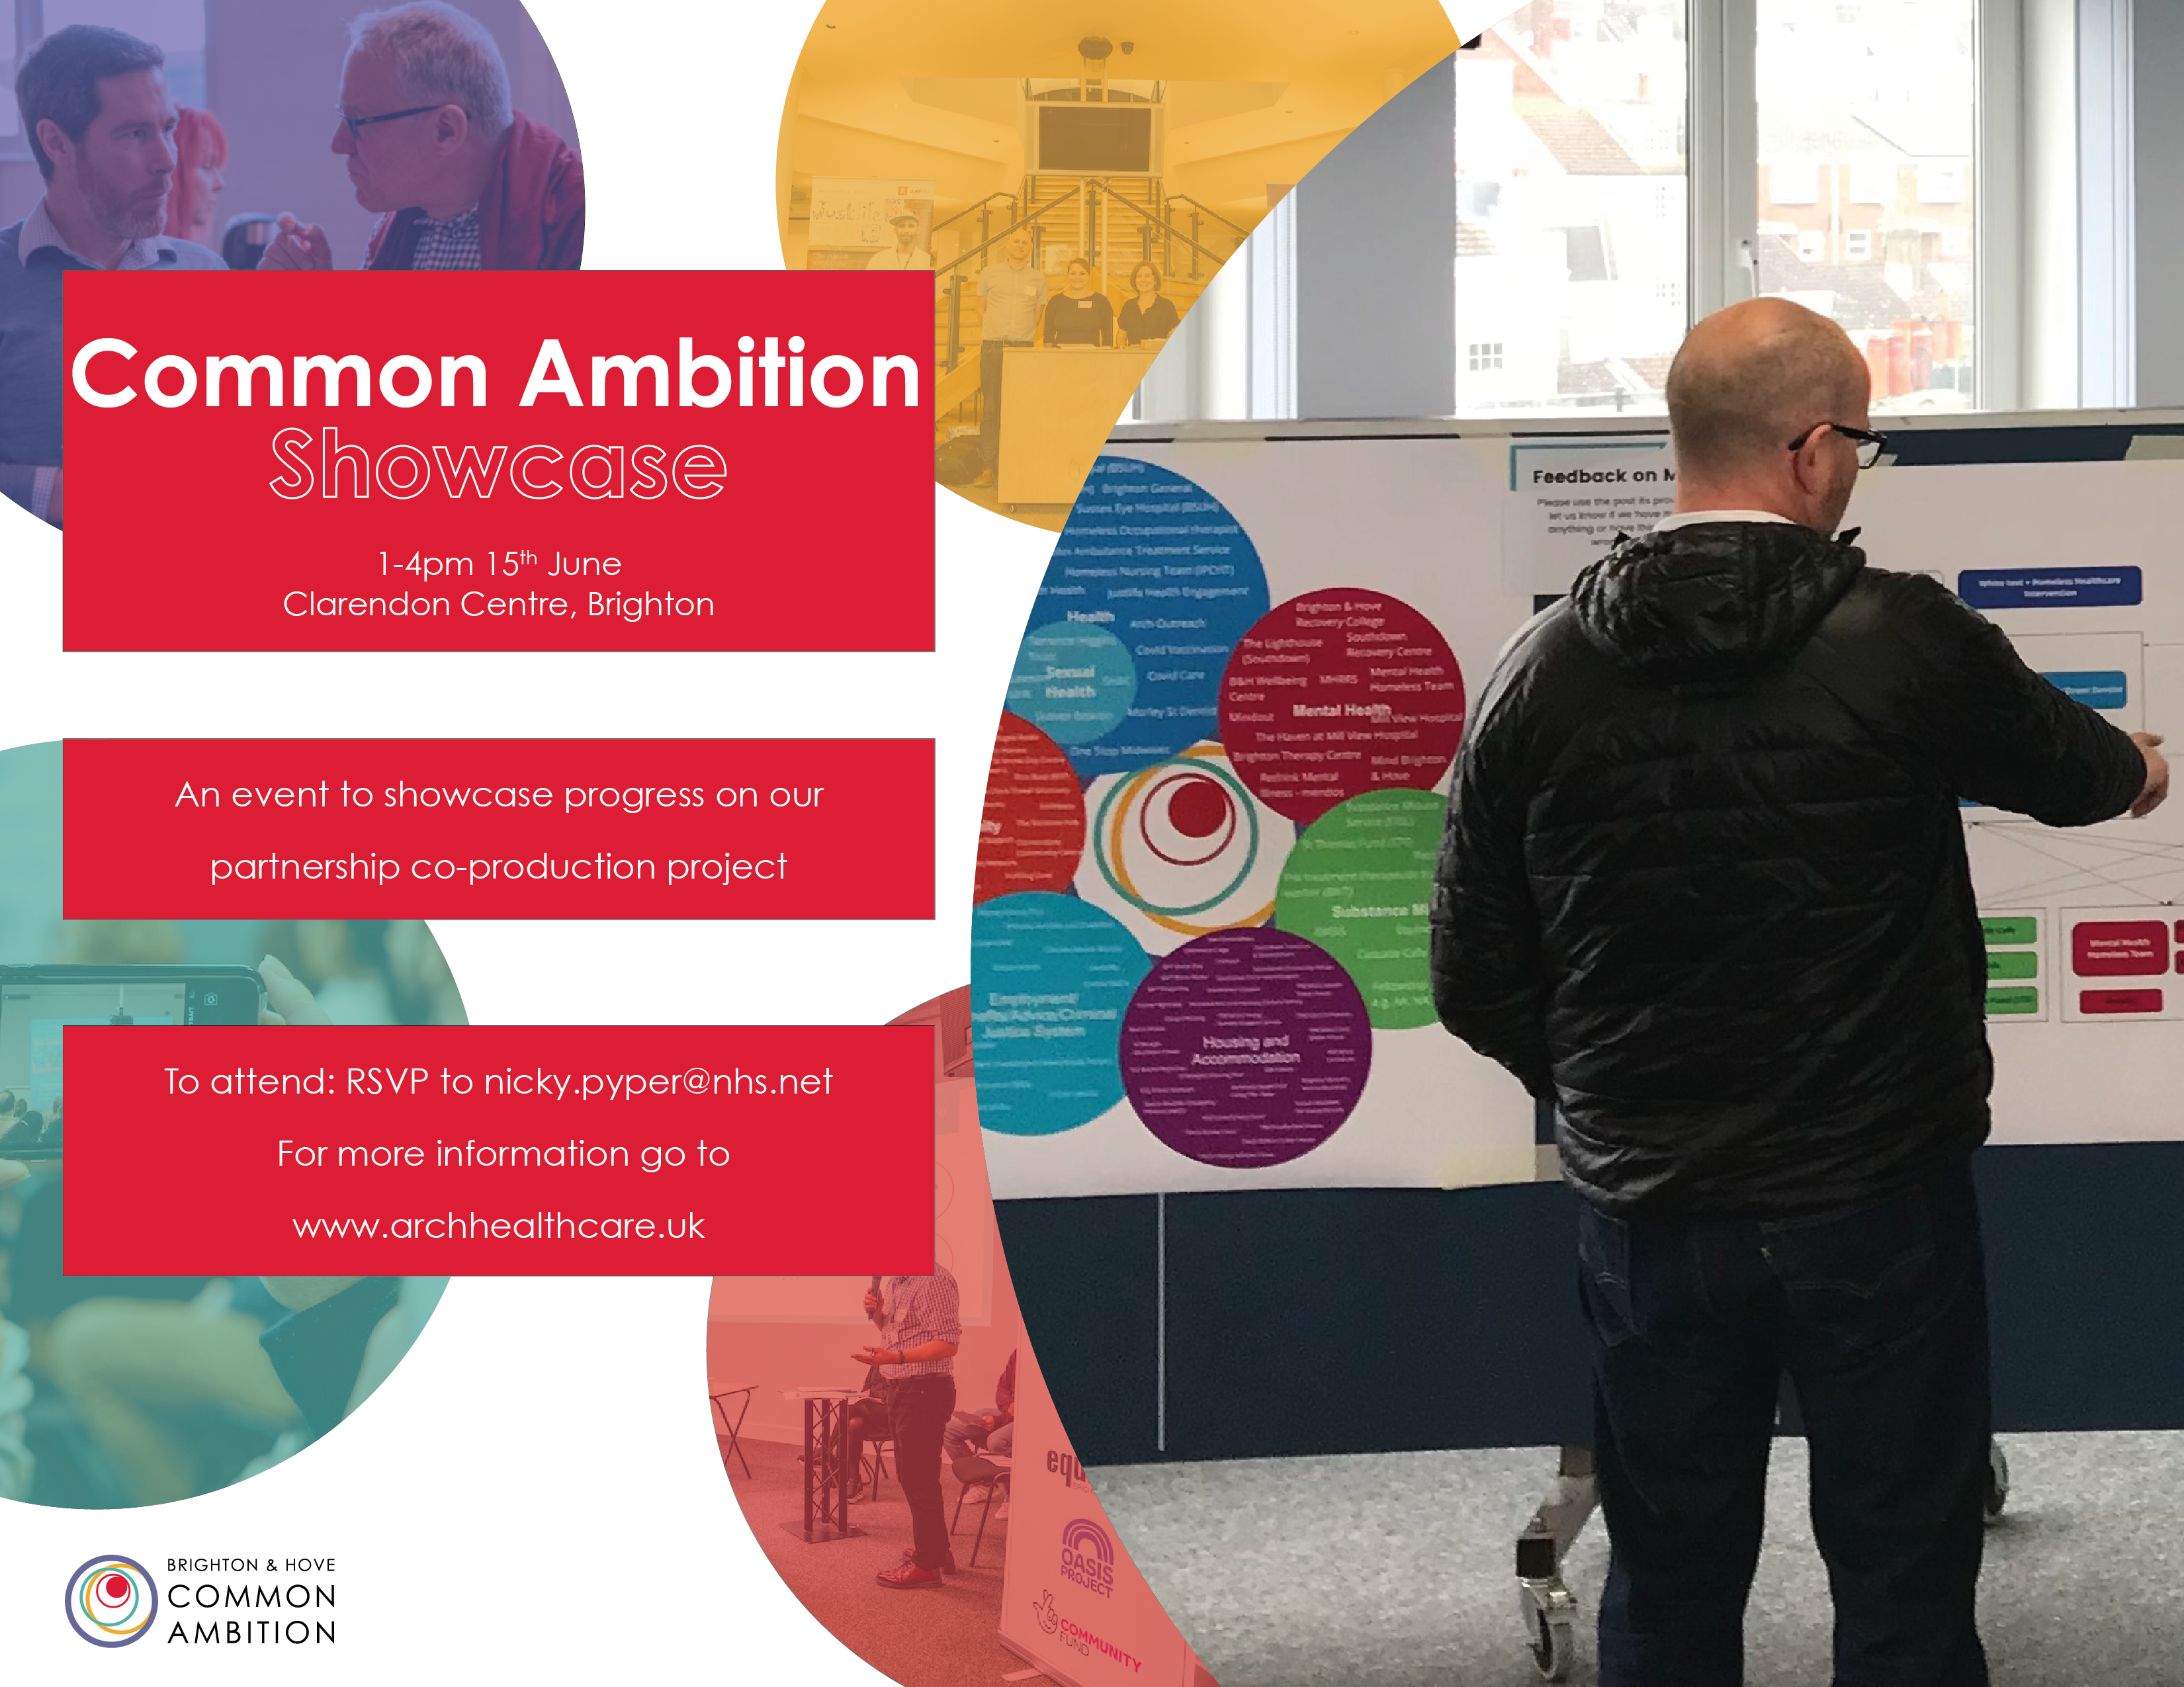 Flyer for Common Ambition showcase event on 15th June